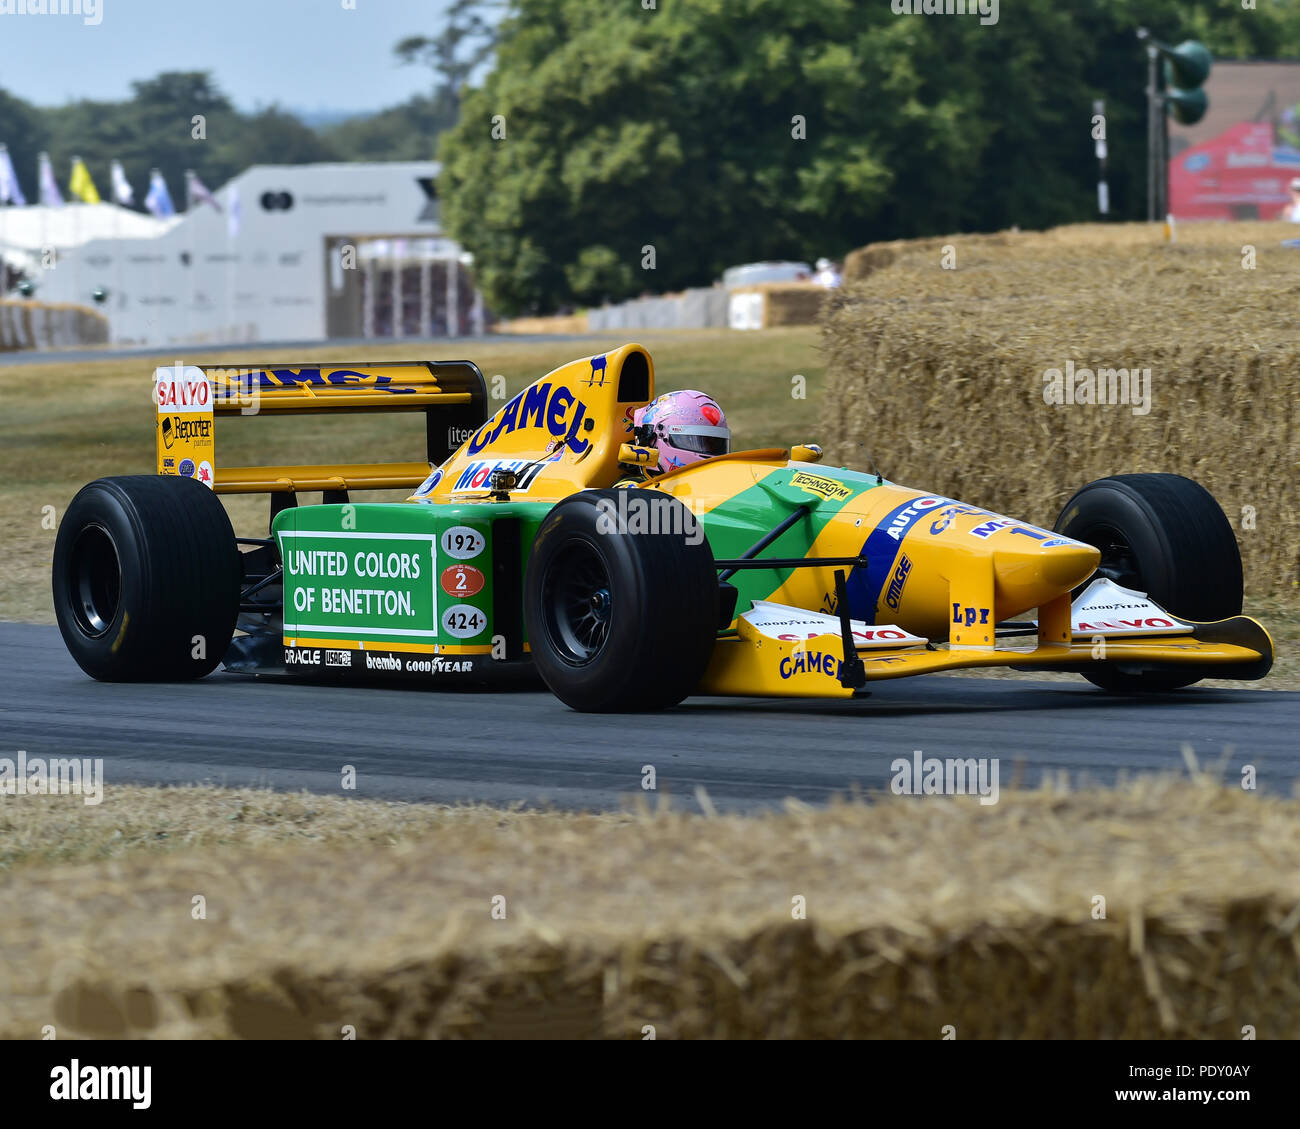 Lorina McLaughlin, Benetton B192, The Turbo era and beyond, Festival of Speed - The Silver Jubilee, Goodwood Festival of Speed, 2018,  Motorsports, au Stock Photo